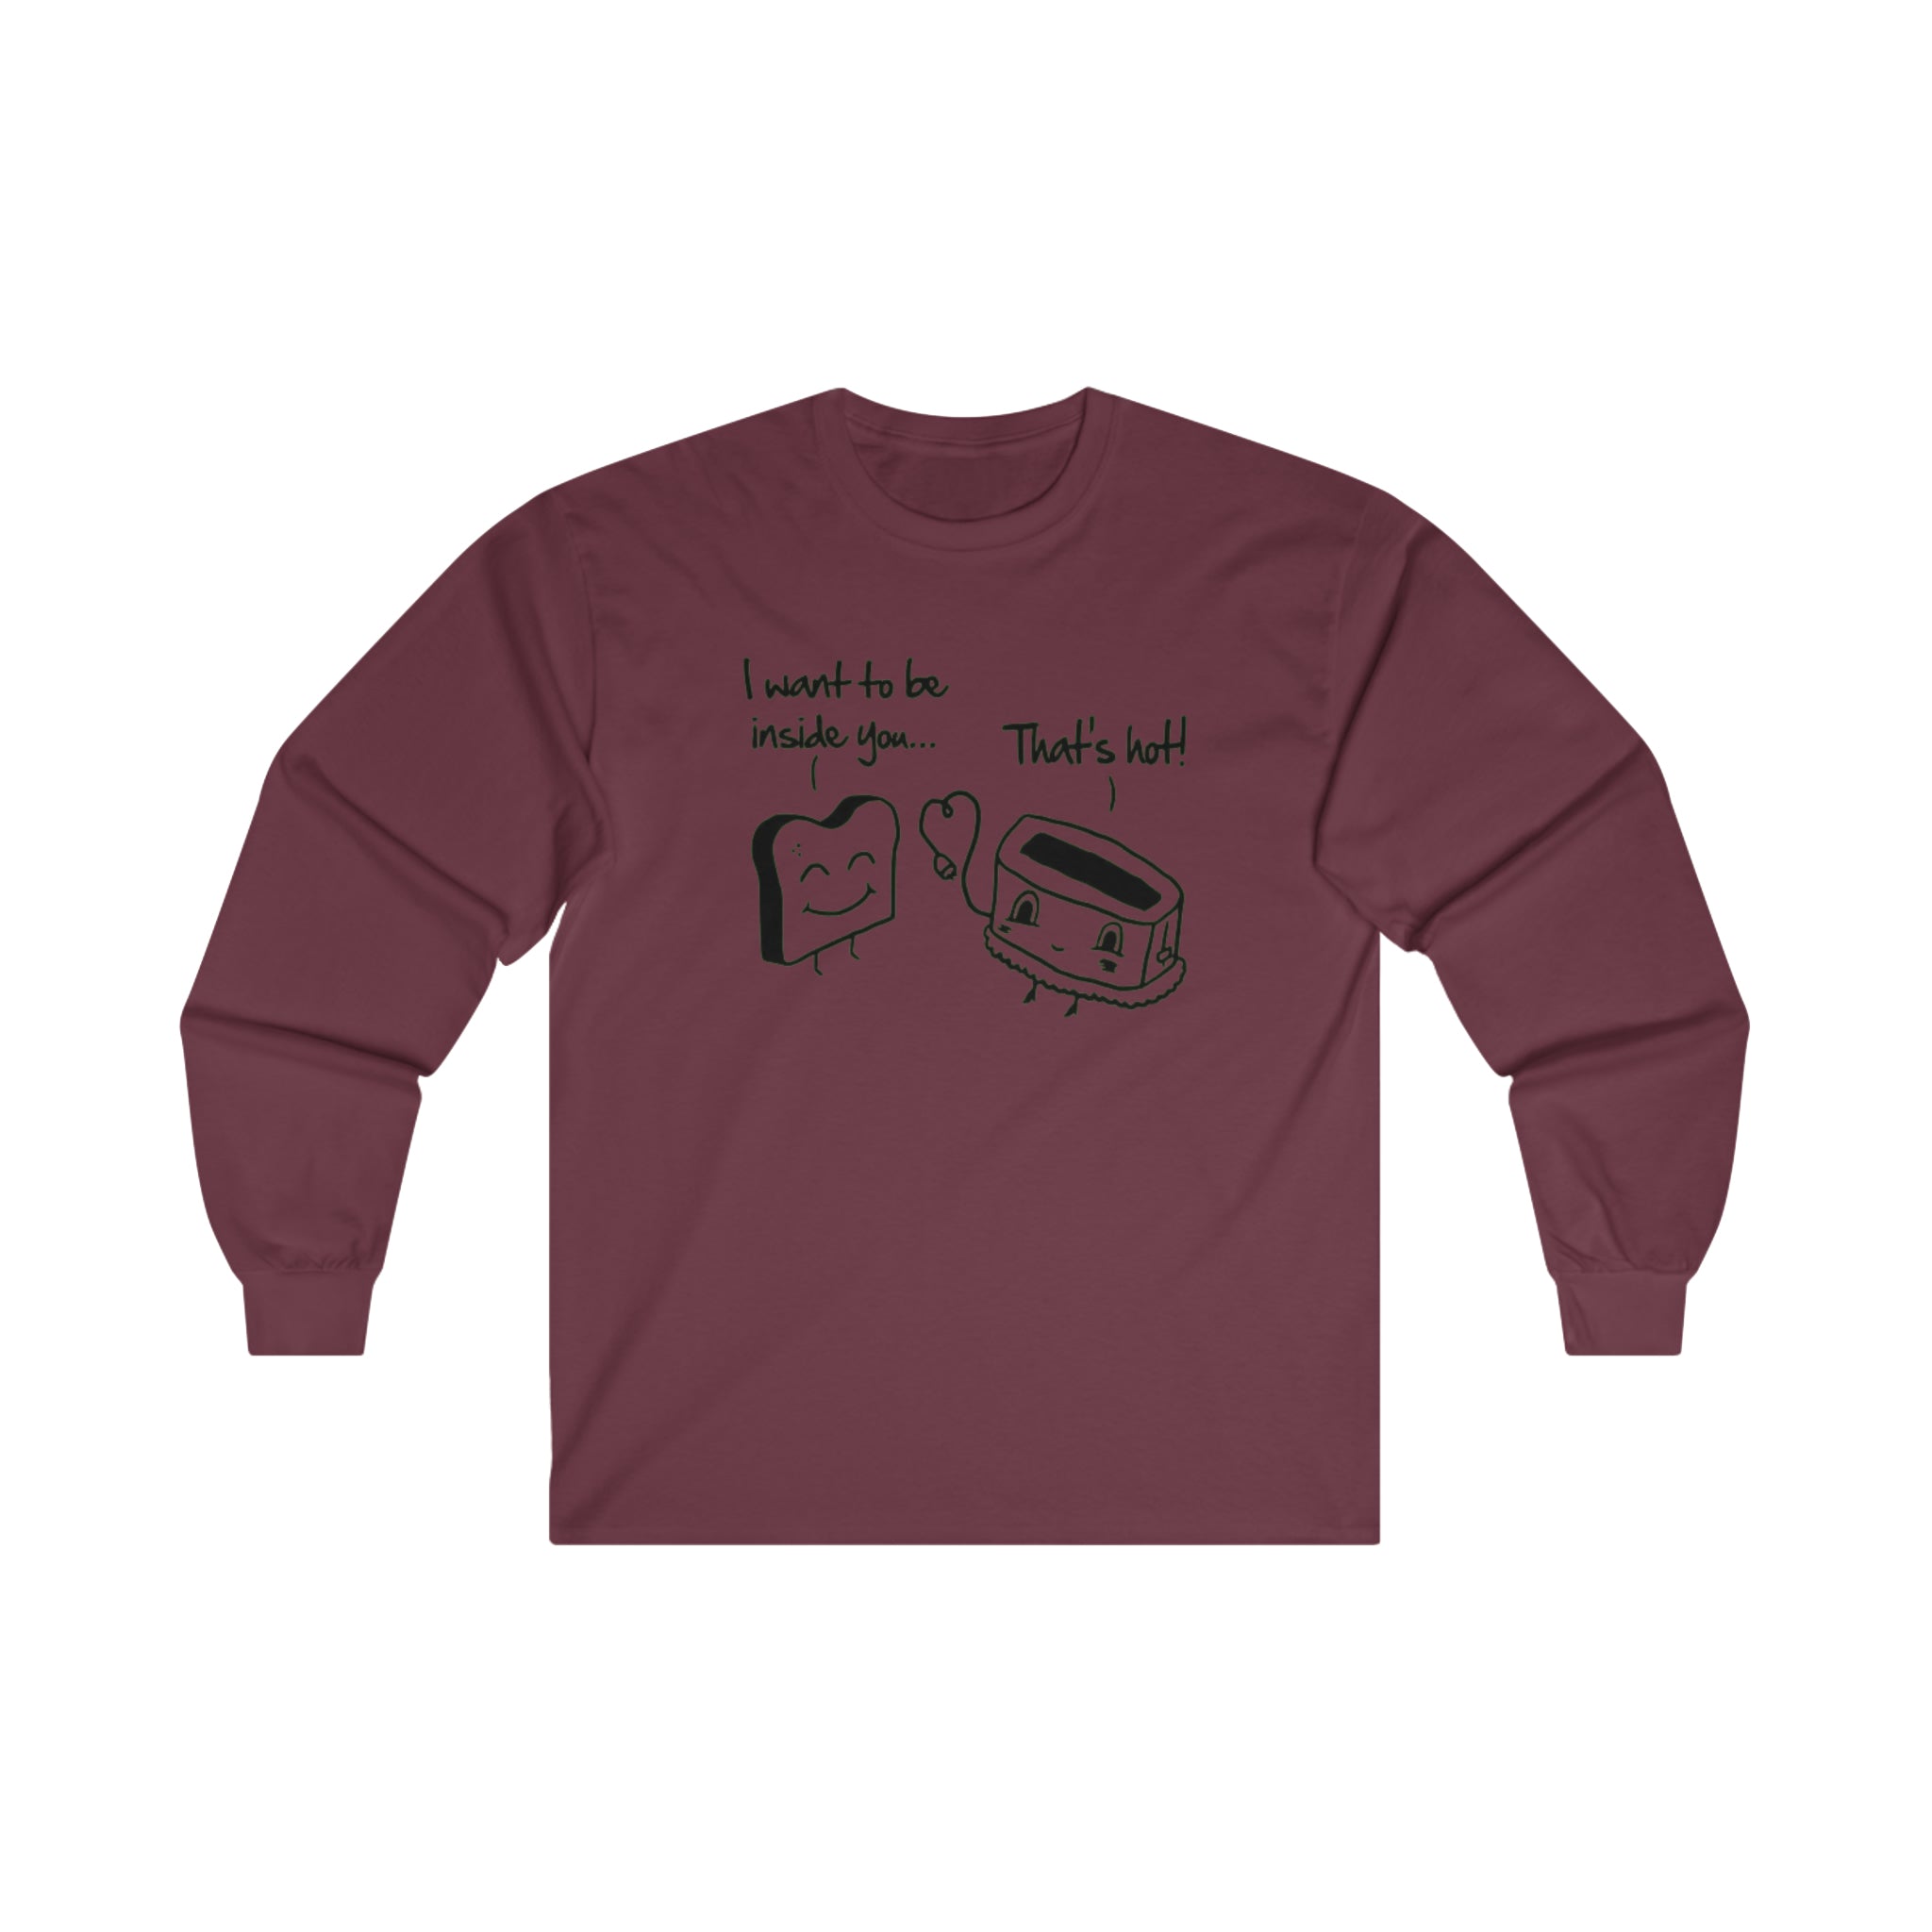 Toaster and Bread Couples Long-Sleeve T-Shirt